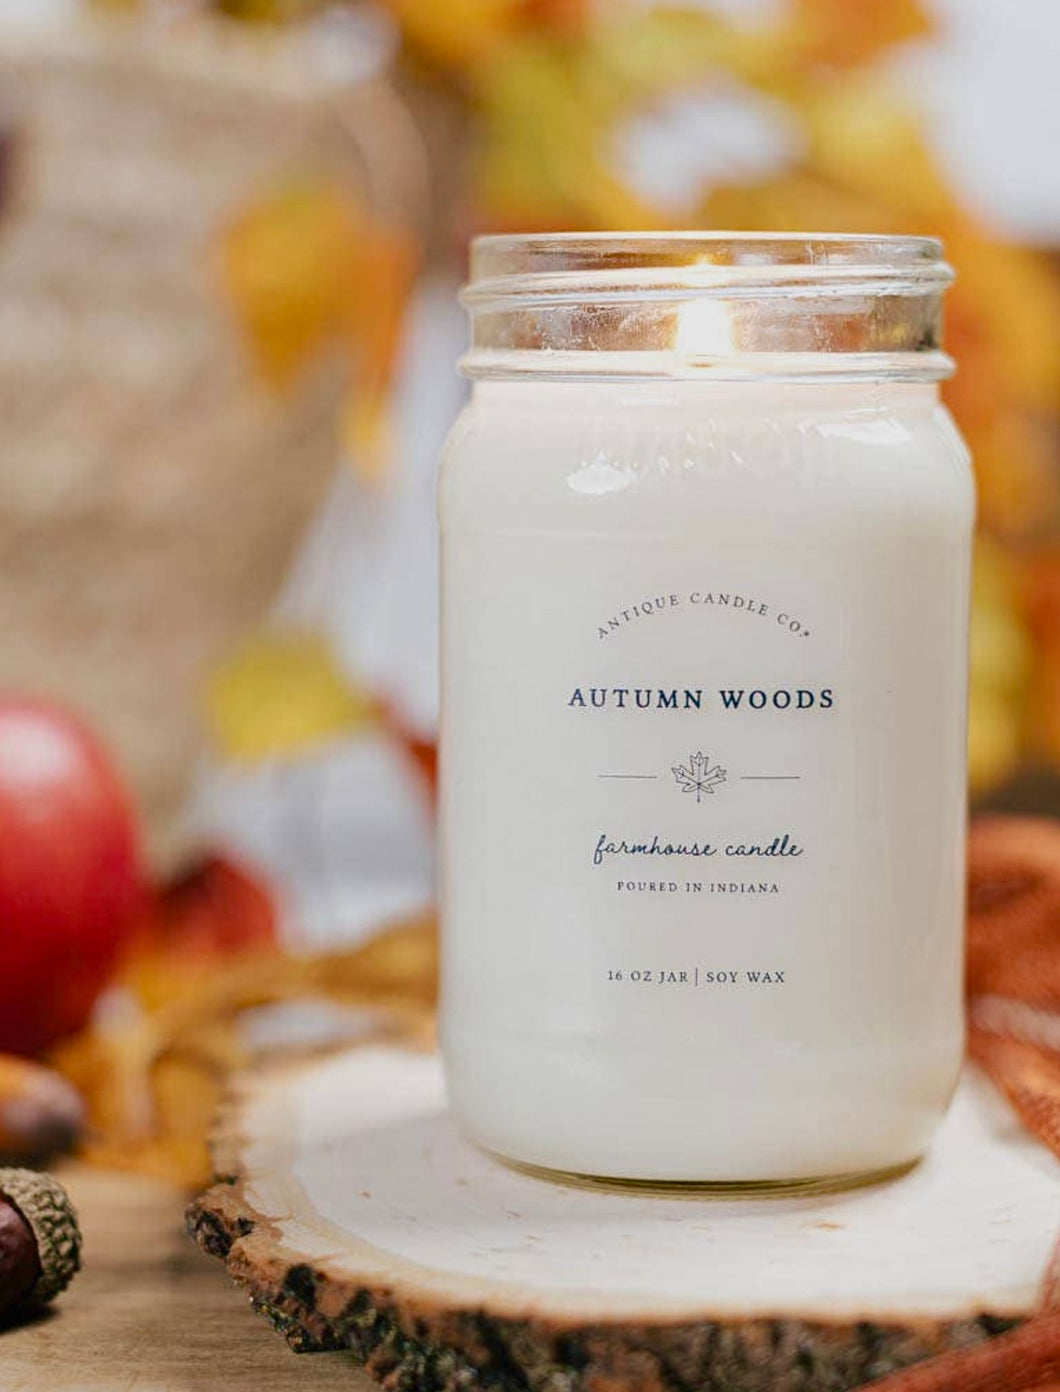 Antique Candle Co. Autumn Woods Candle